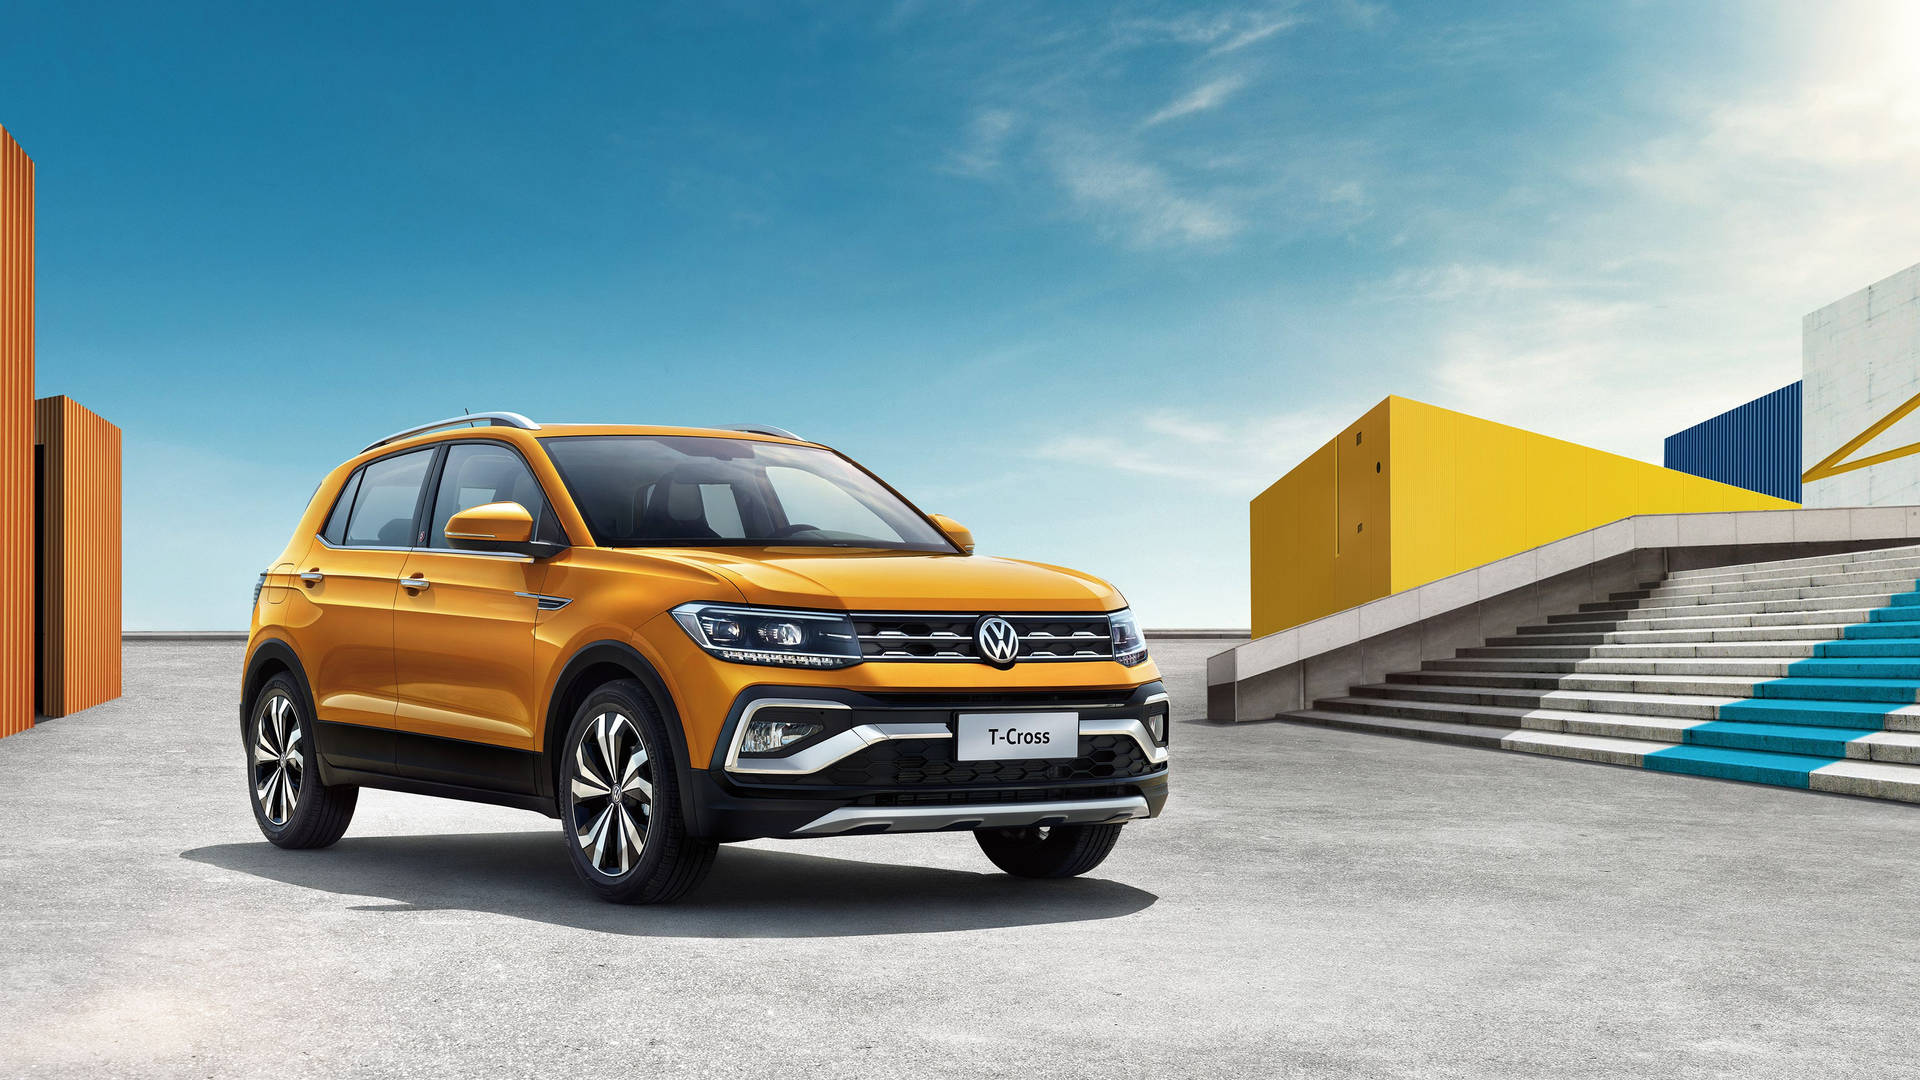 Experience the Power of Volkswagen With T-Cross 280 TSI Wallpaper